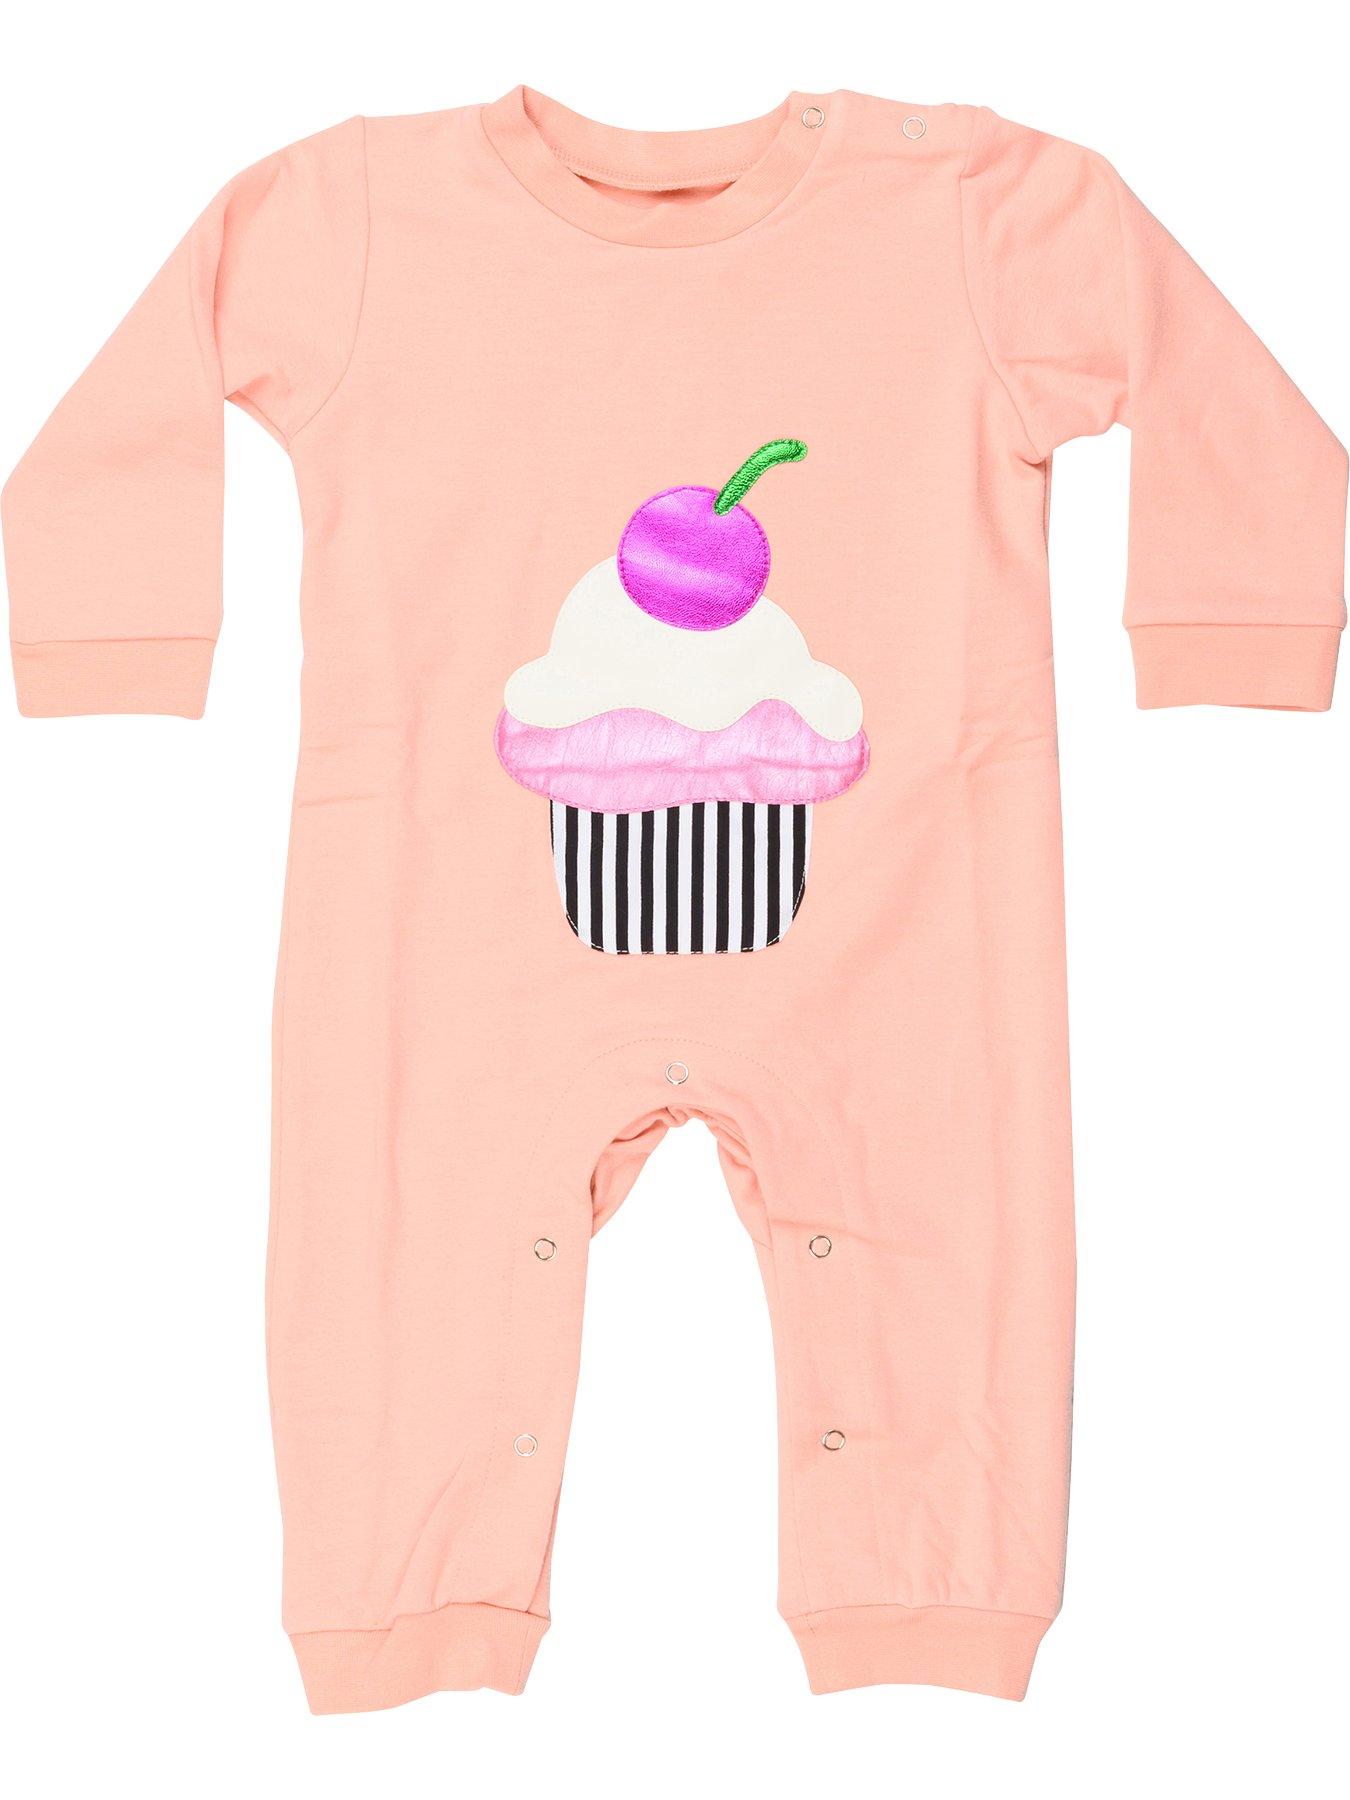 sweet dreams brand baby clothes